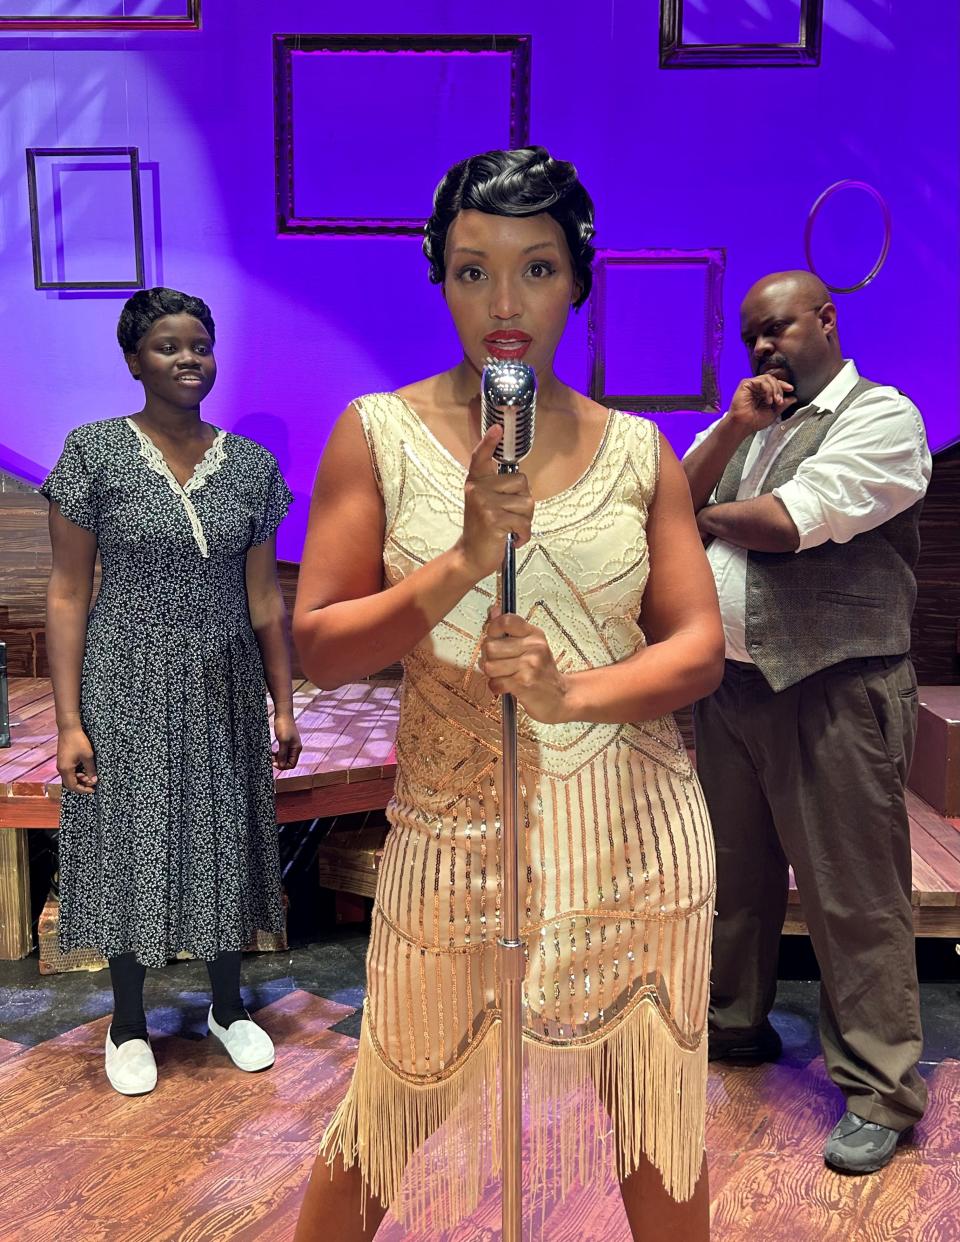 Fendii Trashell plays "Celie," Nichole Savage plays "Shug" and Jamaal K. Solomon plays "Mister" in the musical "The Color Purple," on stage at the Henegar Center through March 12, 2023. Visit henegarcenter.com.